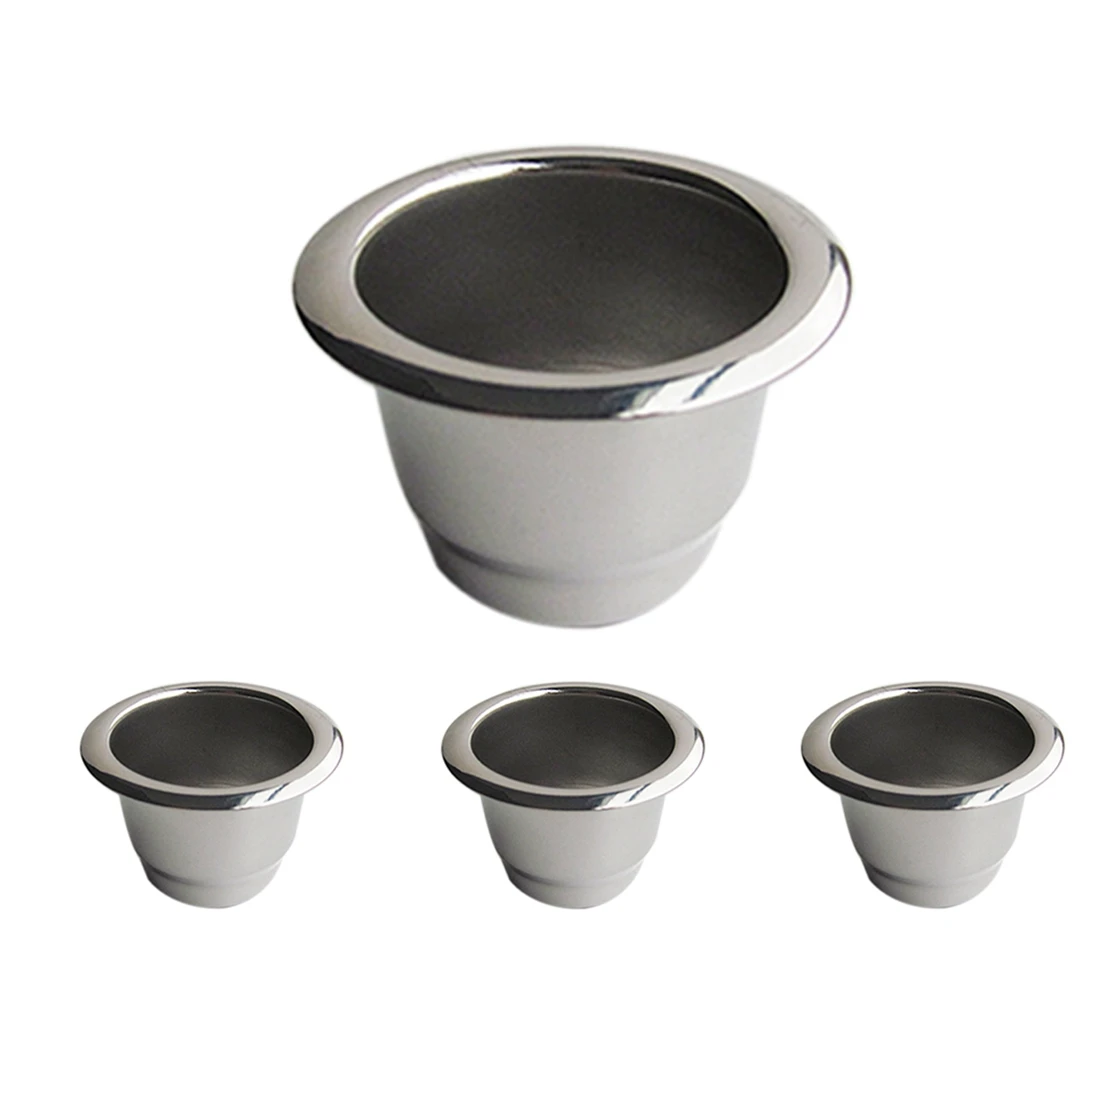 

4Pcs for Nespresso Stainless Steel Refillable Coffee Capsule Coffee Filter Reusable Coffee Pod Reusable Cafe Machine DIY